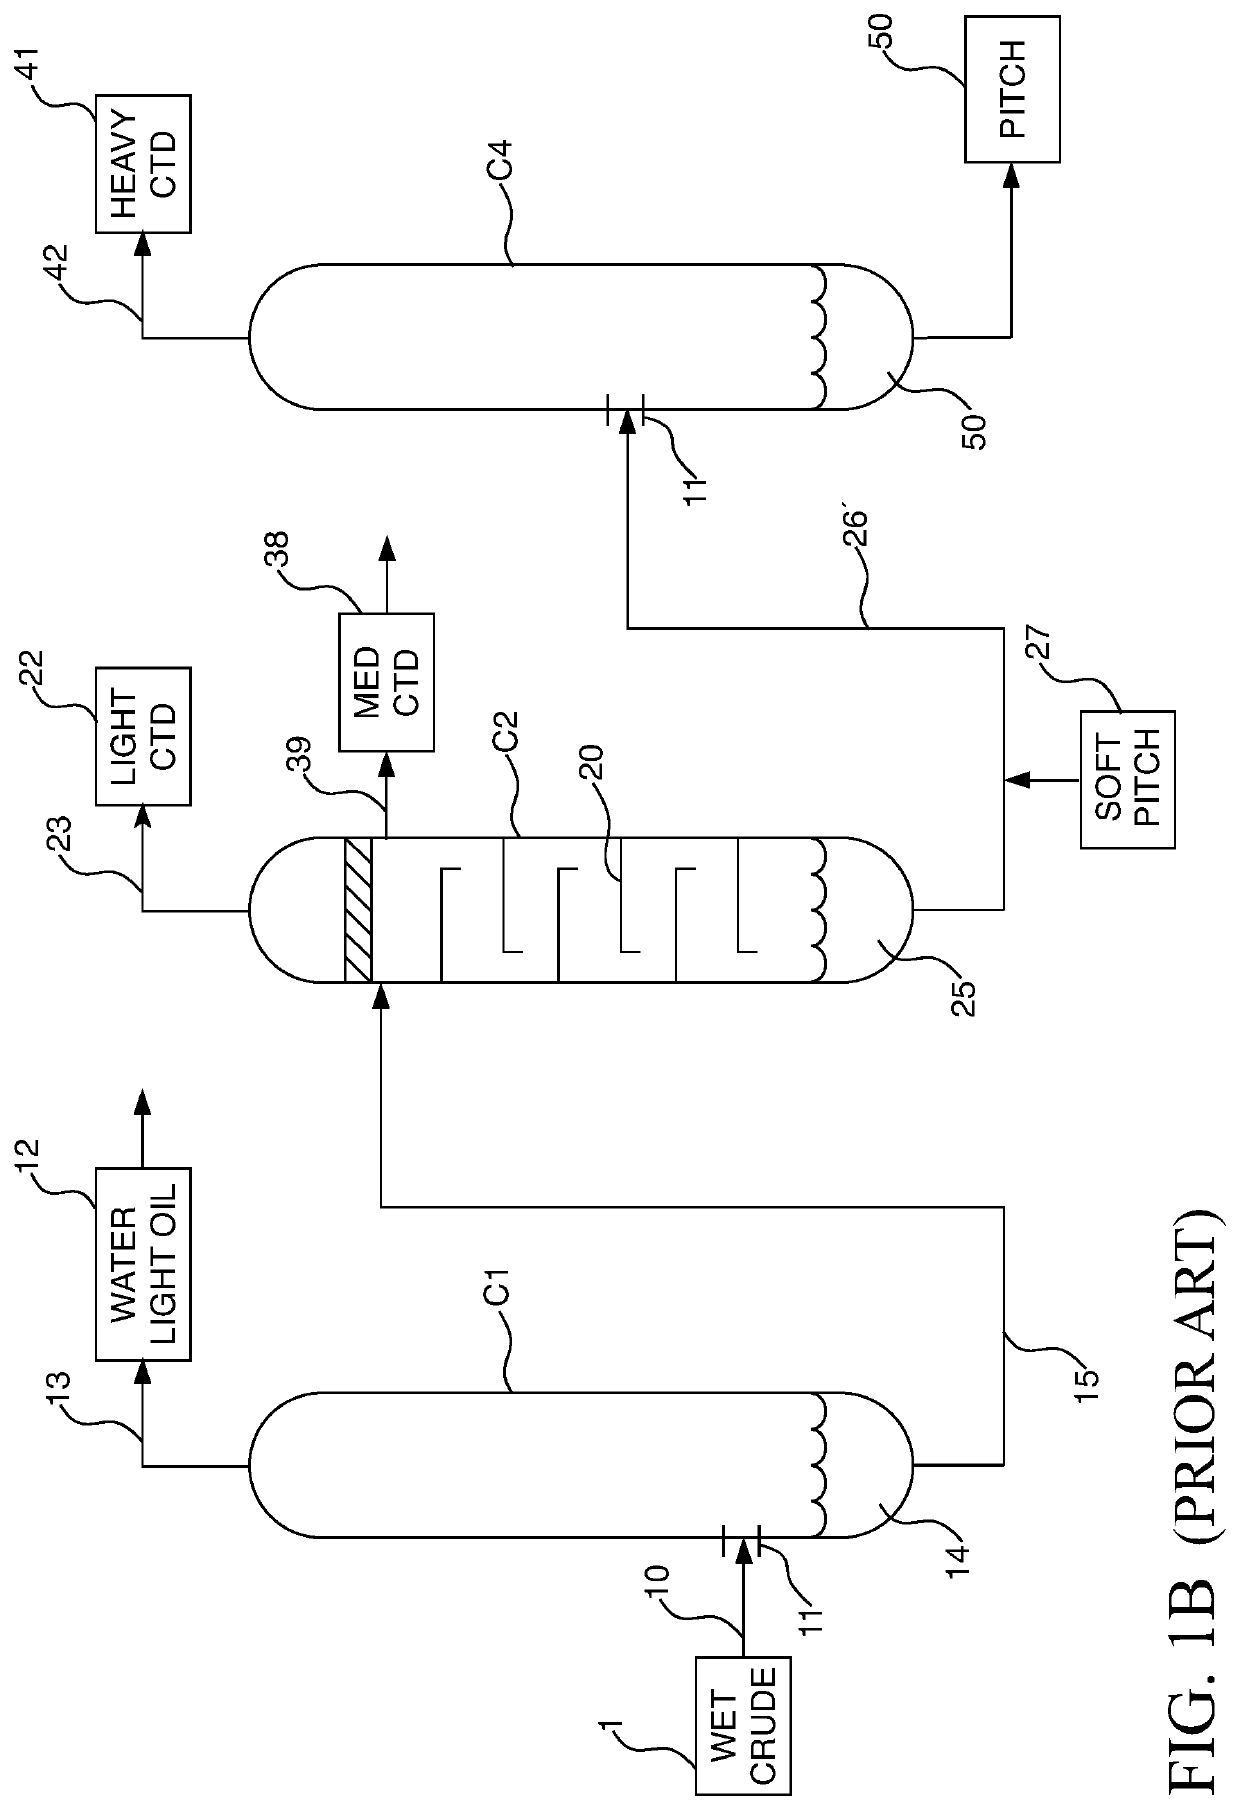 Heat Treatment Process and System for Increased Pitch Yields